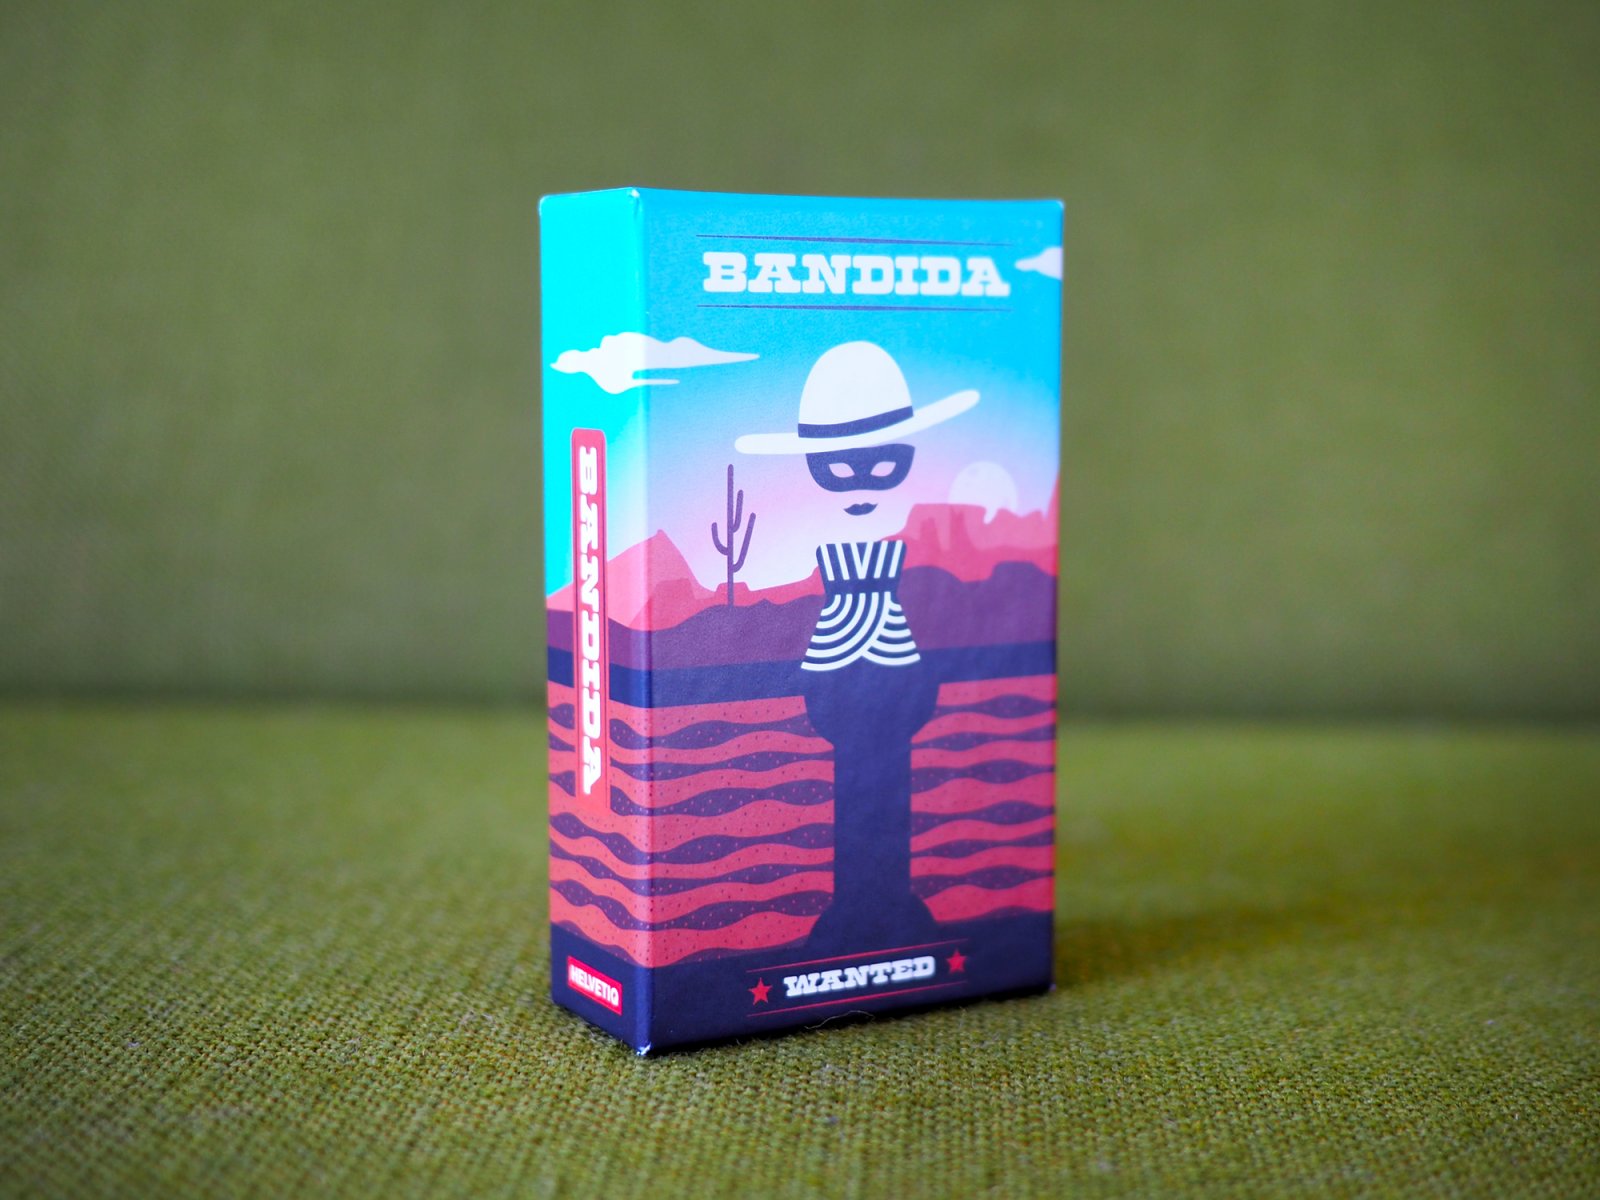 Gifts for Girls in Switzerland - Bandida Card Game